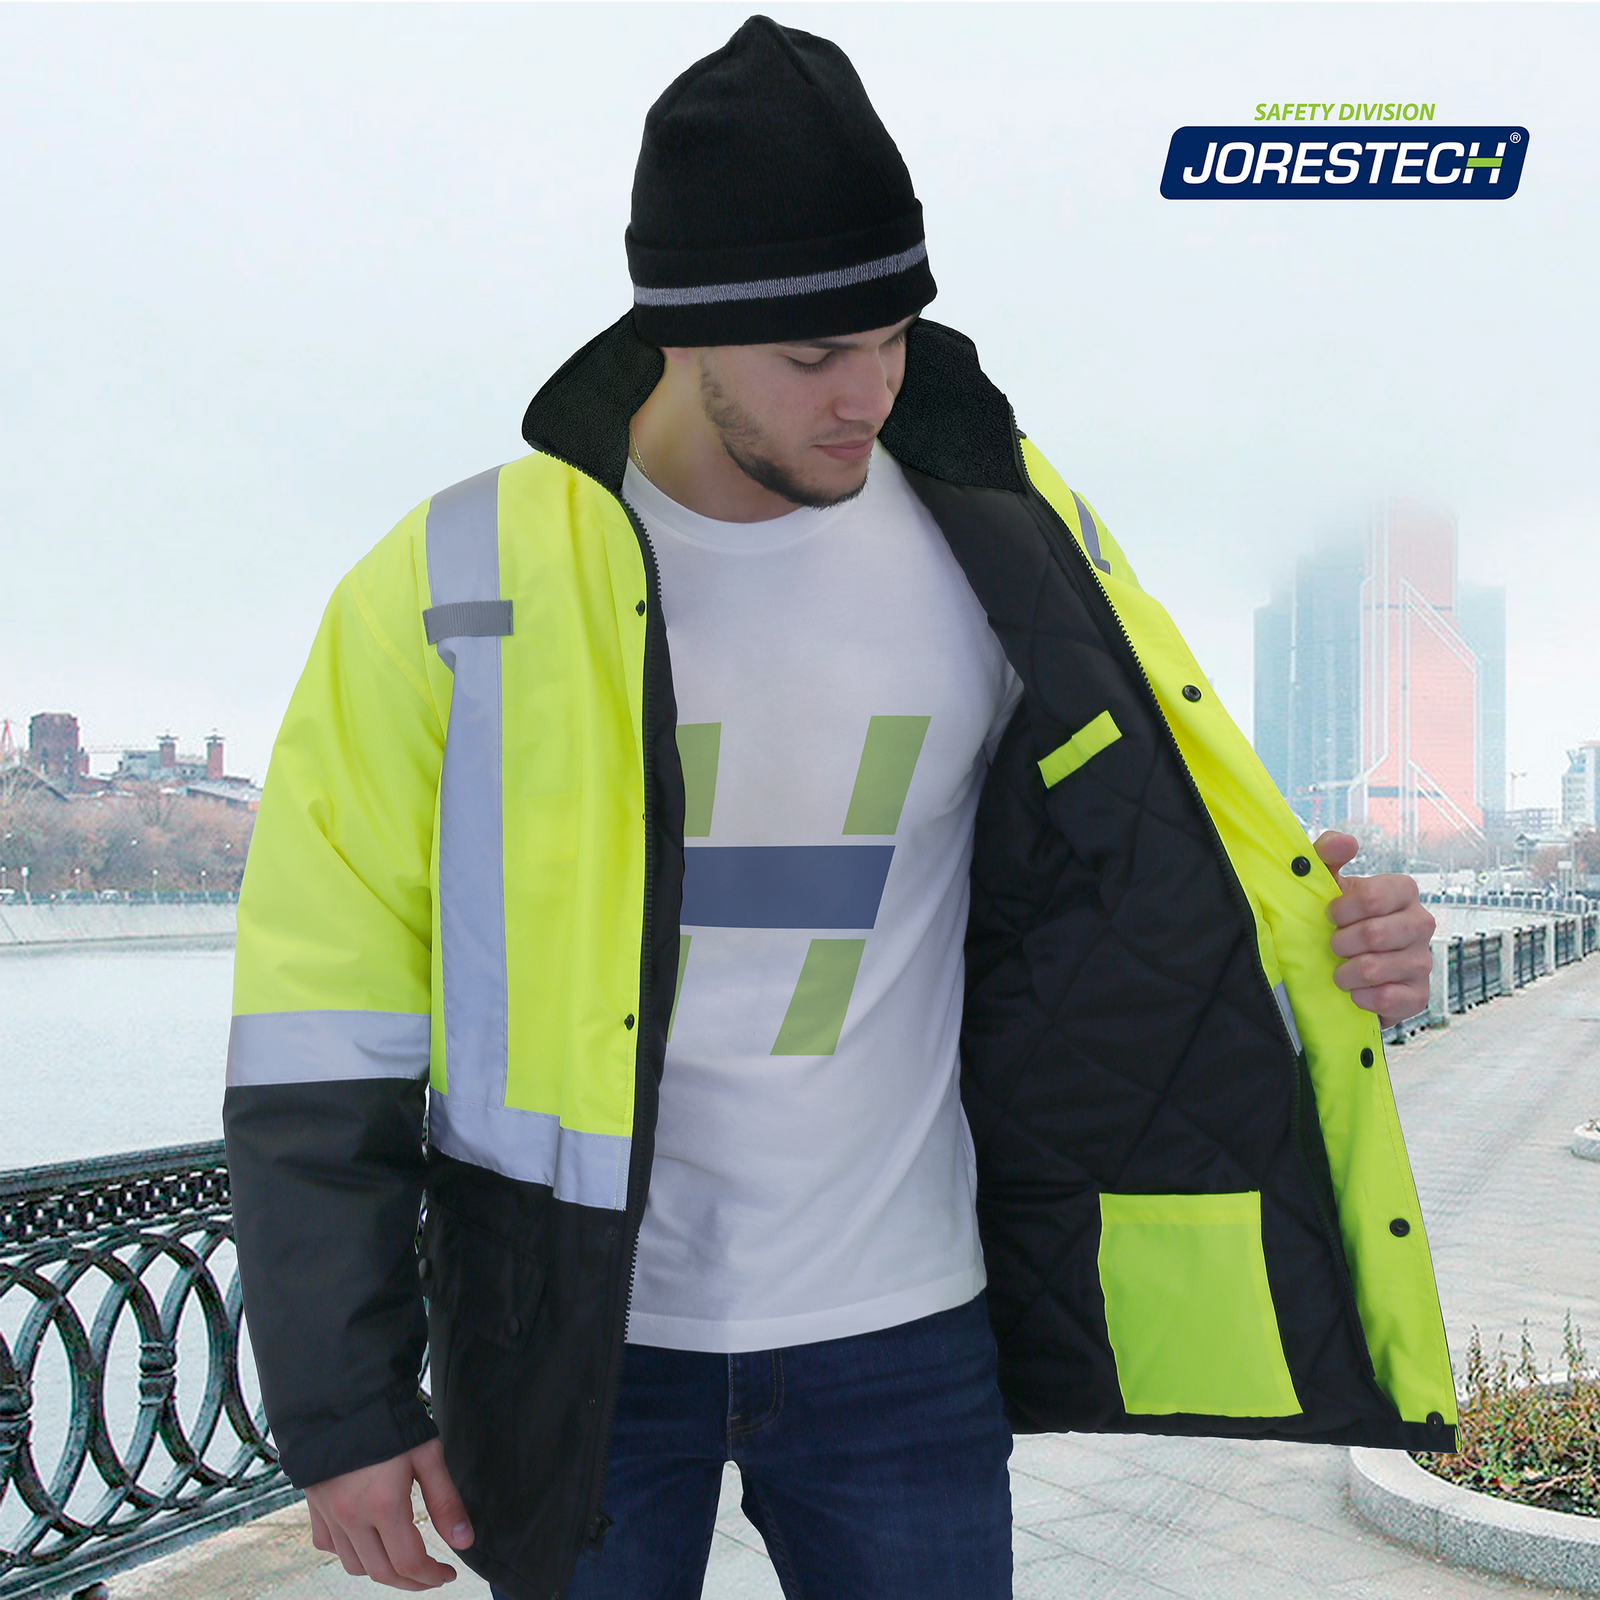 Man in a city wearing the ANSI compliant hi-vis yellow and black JORESTECH parka safety jacket with pockets and reflective stripes. The man is searching for something inside the pockets located in the inner layer of the safety parka jacket